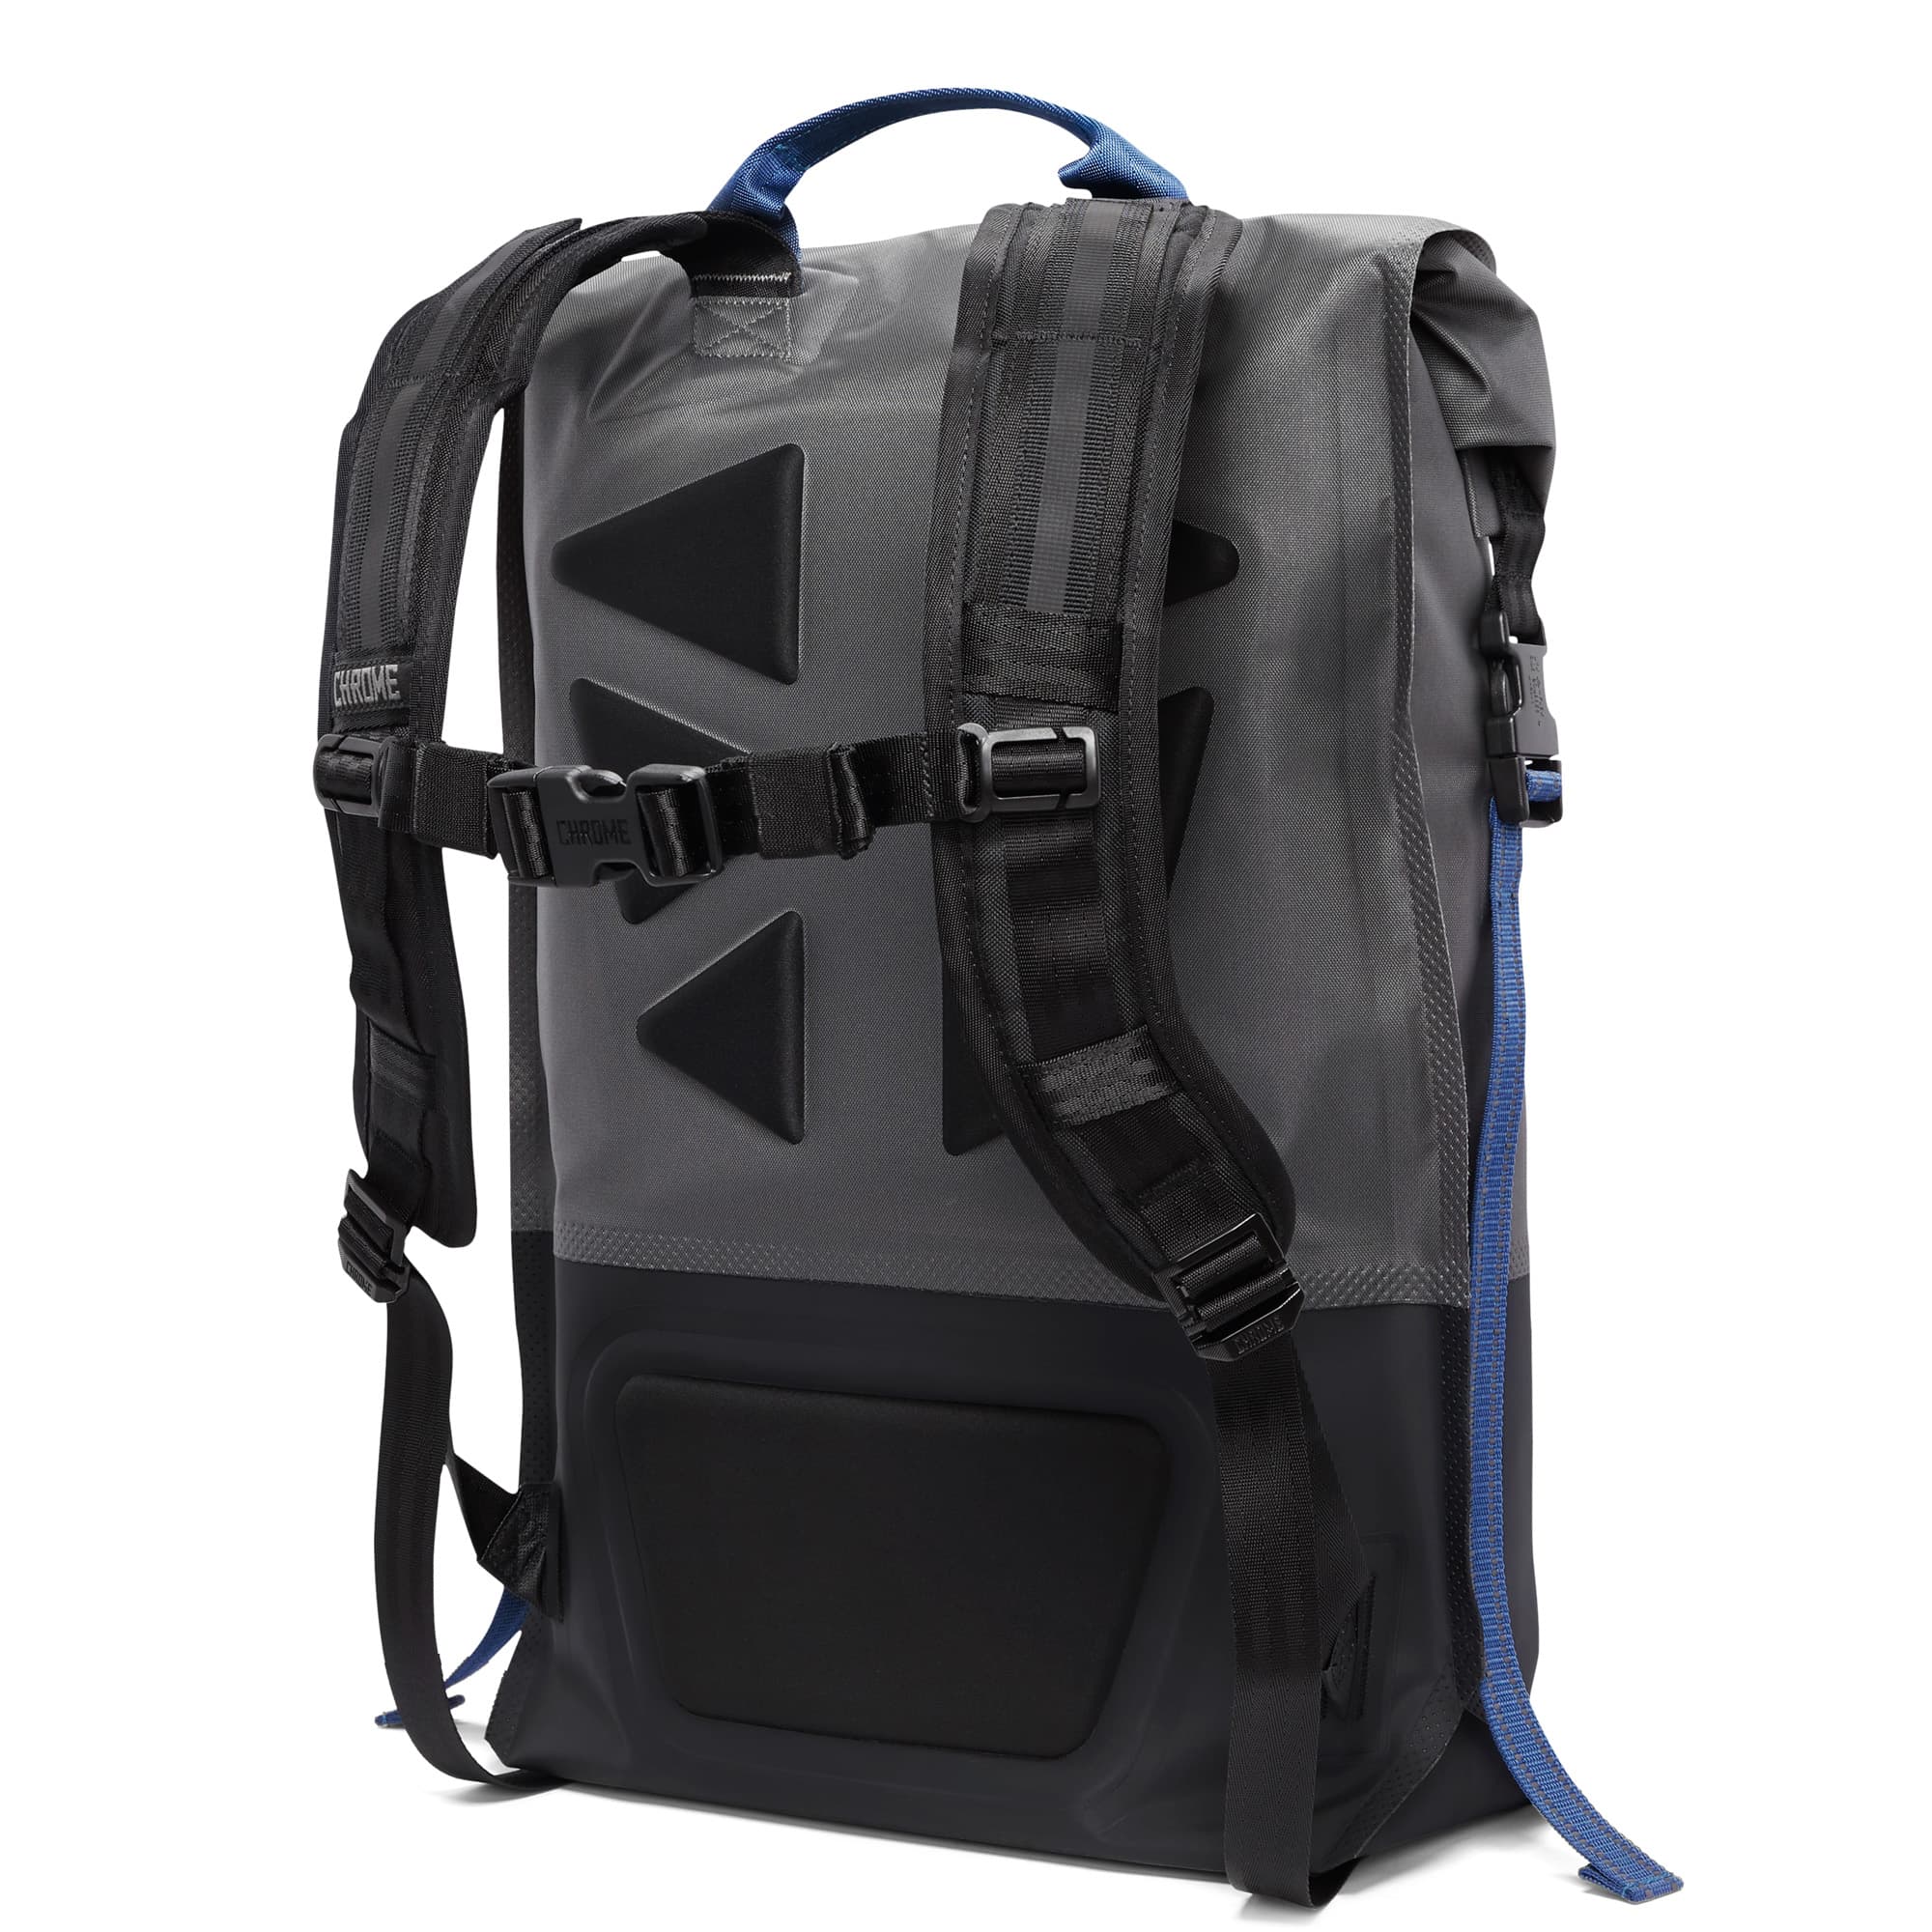 Waterproof 30L highly reflective backpack in grey back harness detail #color_fog